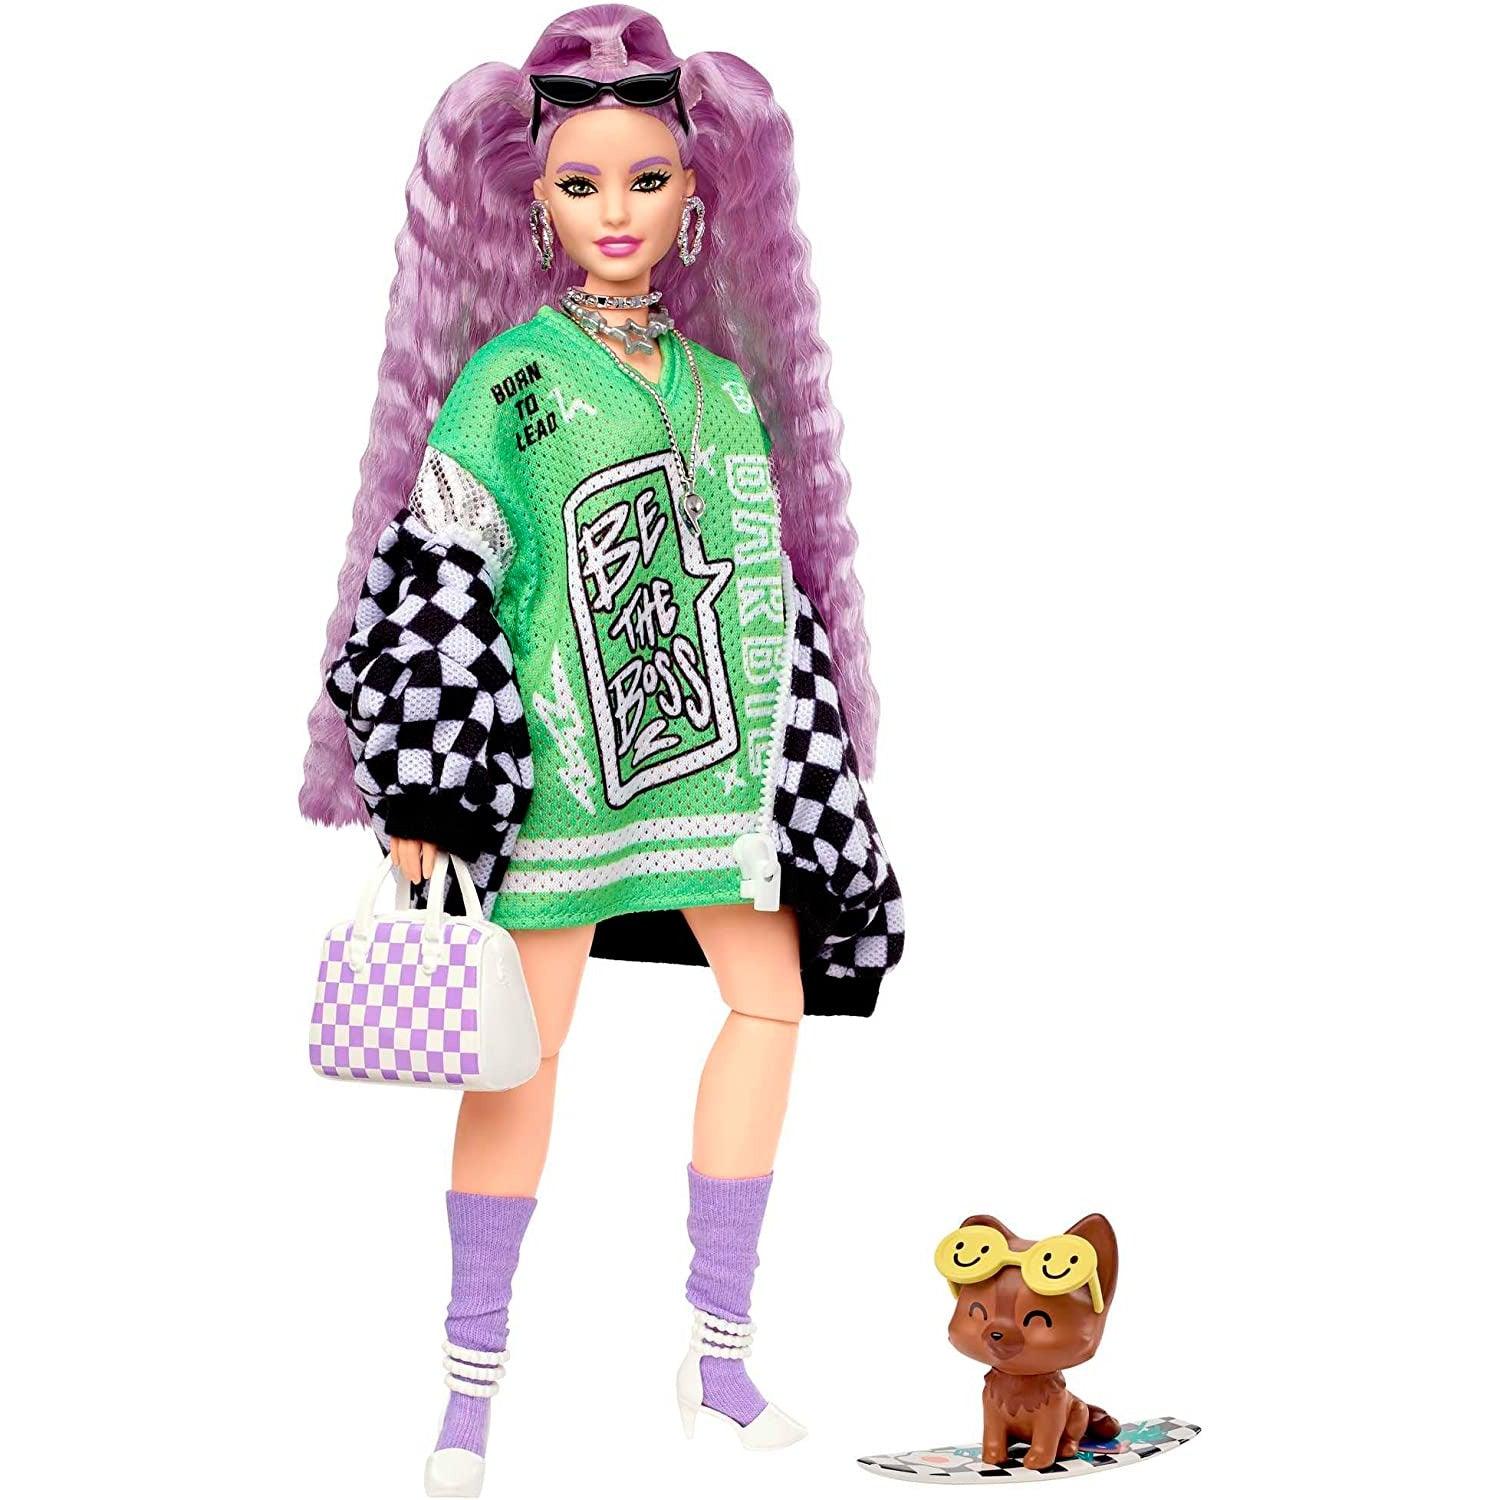 Barbie Doll and Accessories, Barbie Extra Fashion Doll with Crimped Lavender Hair and Checkered Jacket, Pet Puppy